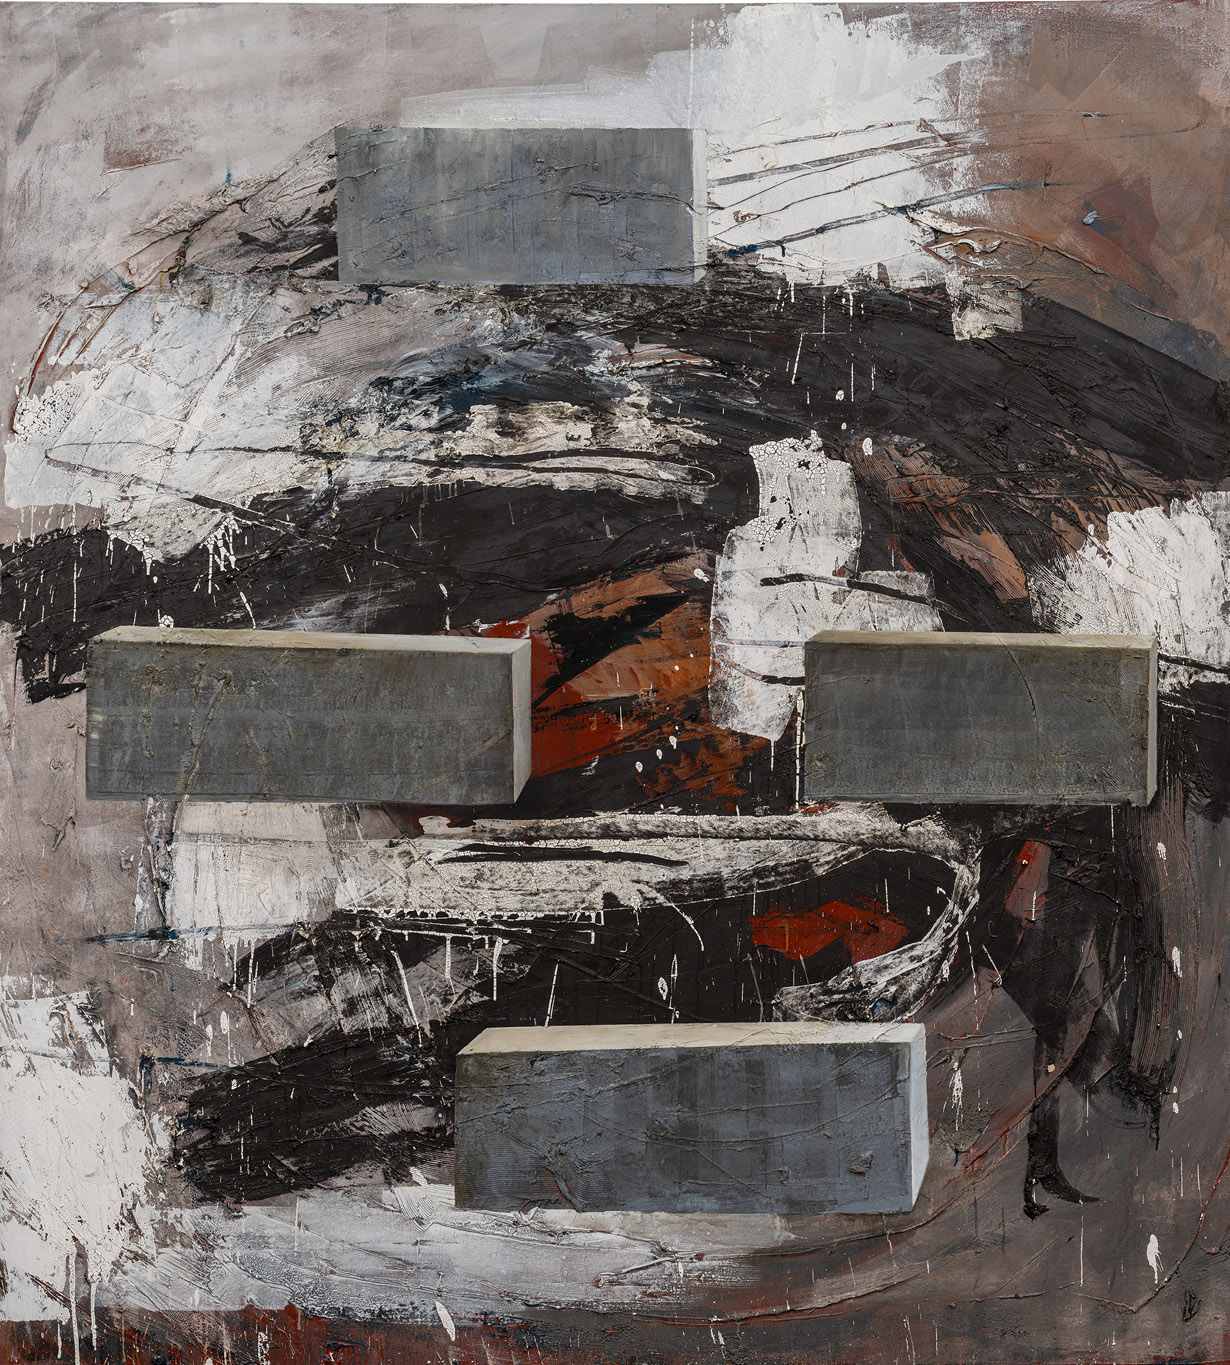 Christoph M. Gais,12.1.88 (00793), 1988, huile sur toile, 230 x 210 cm, exposition Image Worlds from 1990 until Today, 2023, MKM Museum Küppersmühle for Modern Art, Duisburg, Allemagne, Collection Ströher, (c) Christoph M. Gais, (c) photo Henning Krause, Boombartstic Art Magazine